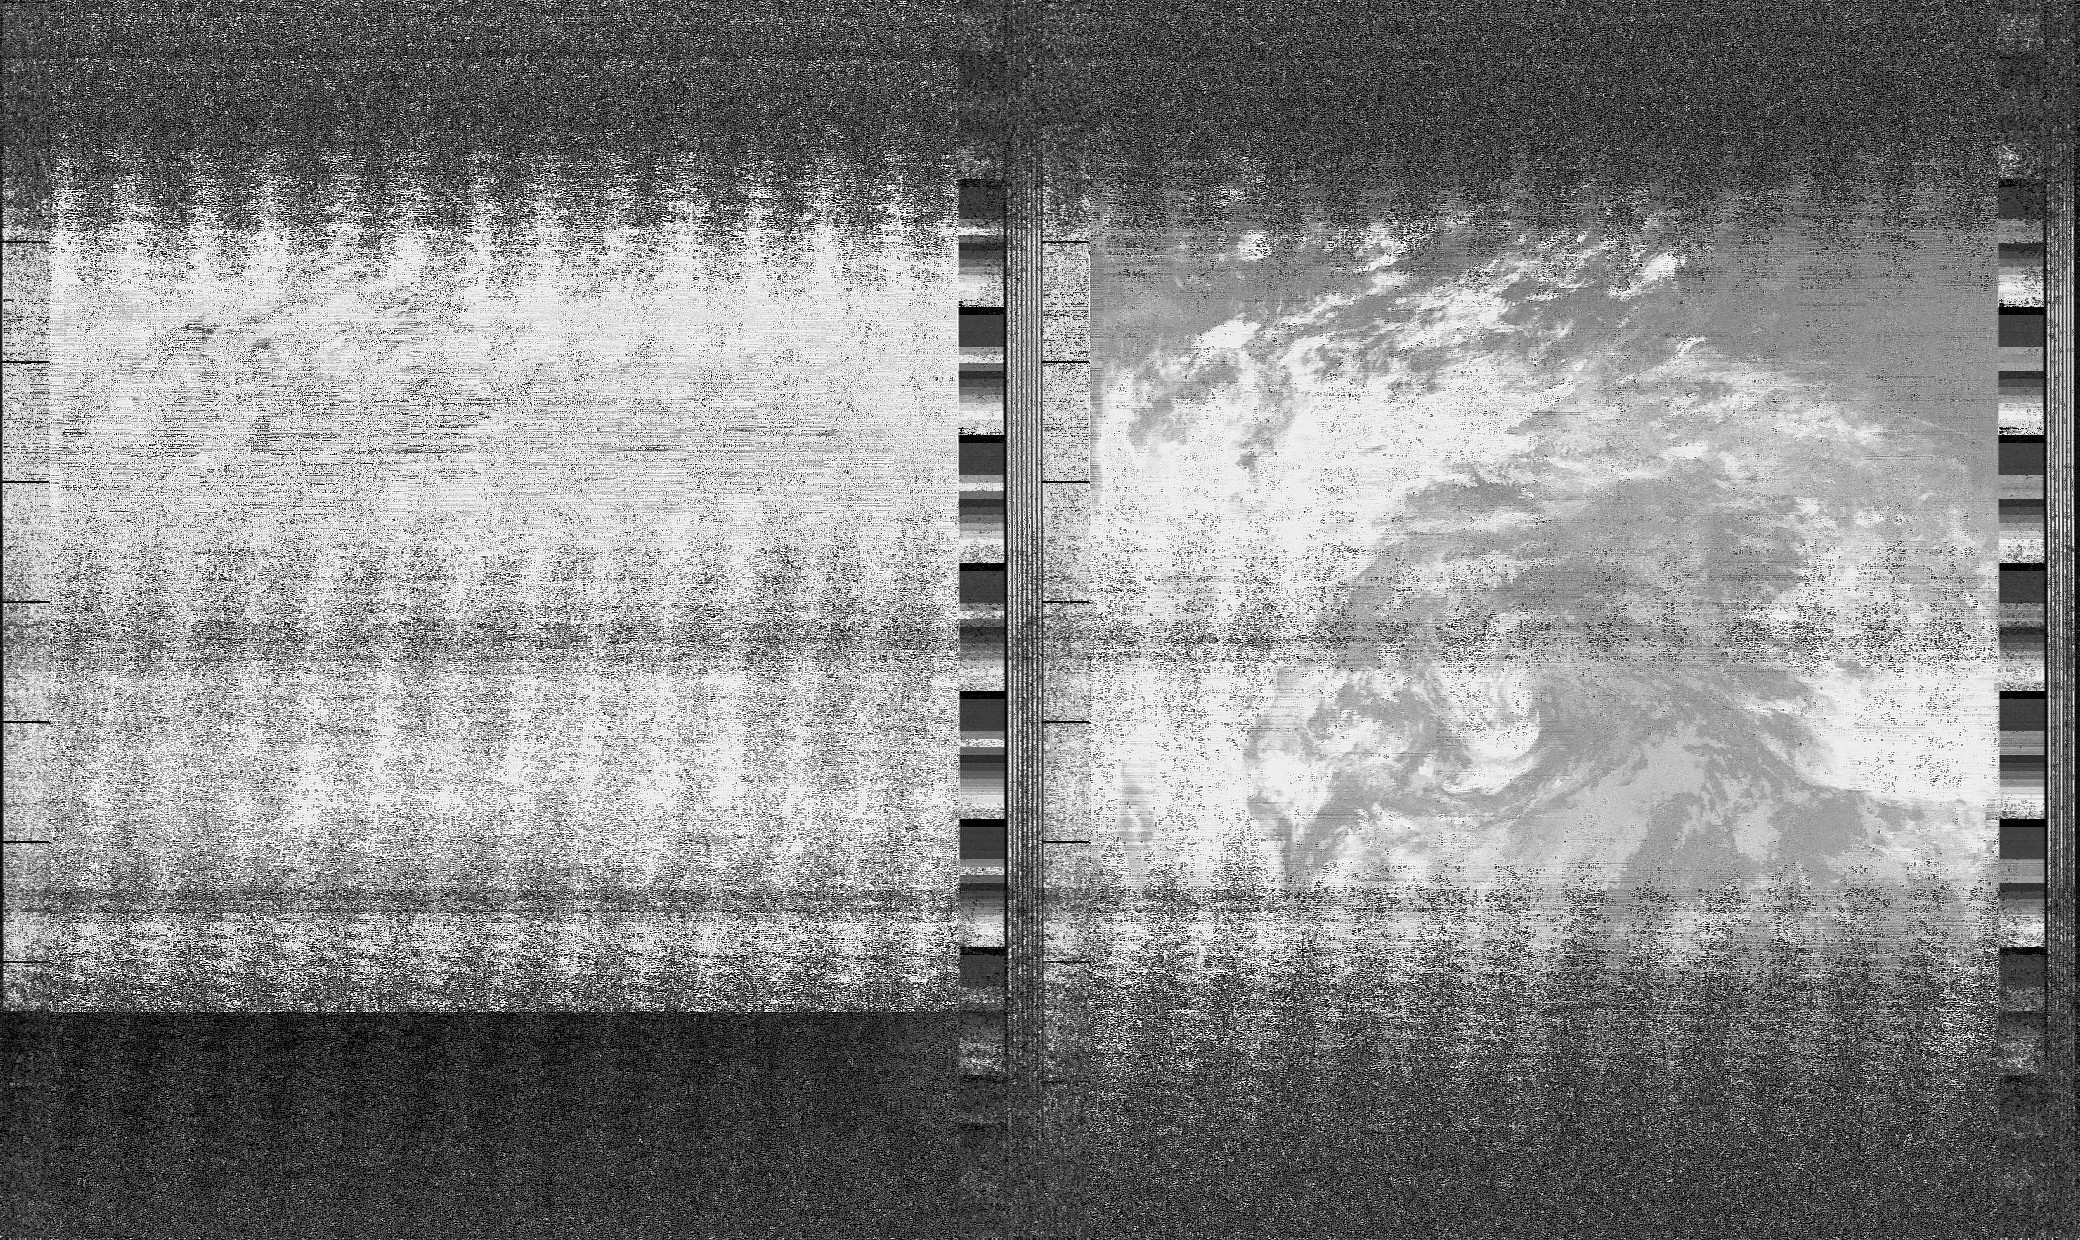   Noaa18 transmission on 5/8 22:06 at 137.915Mhz